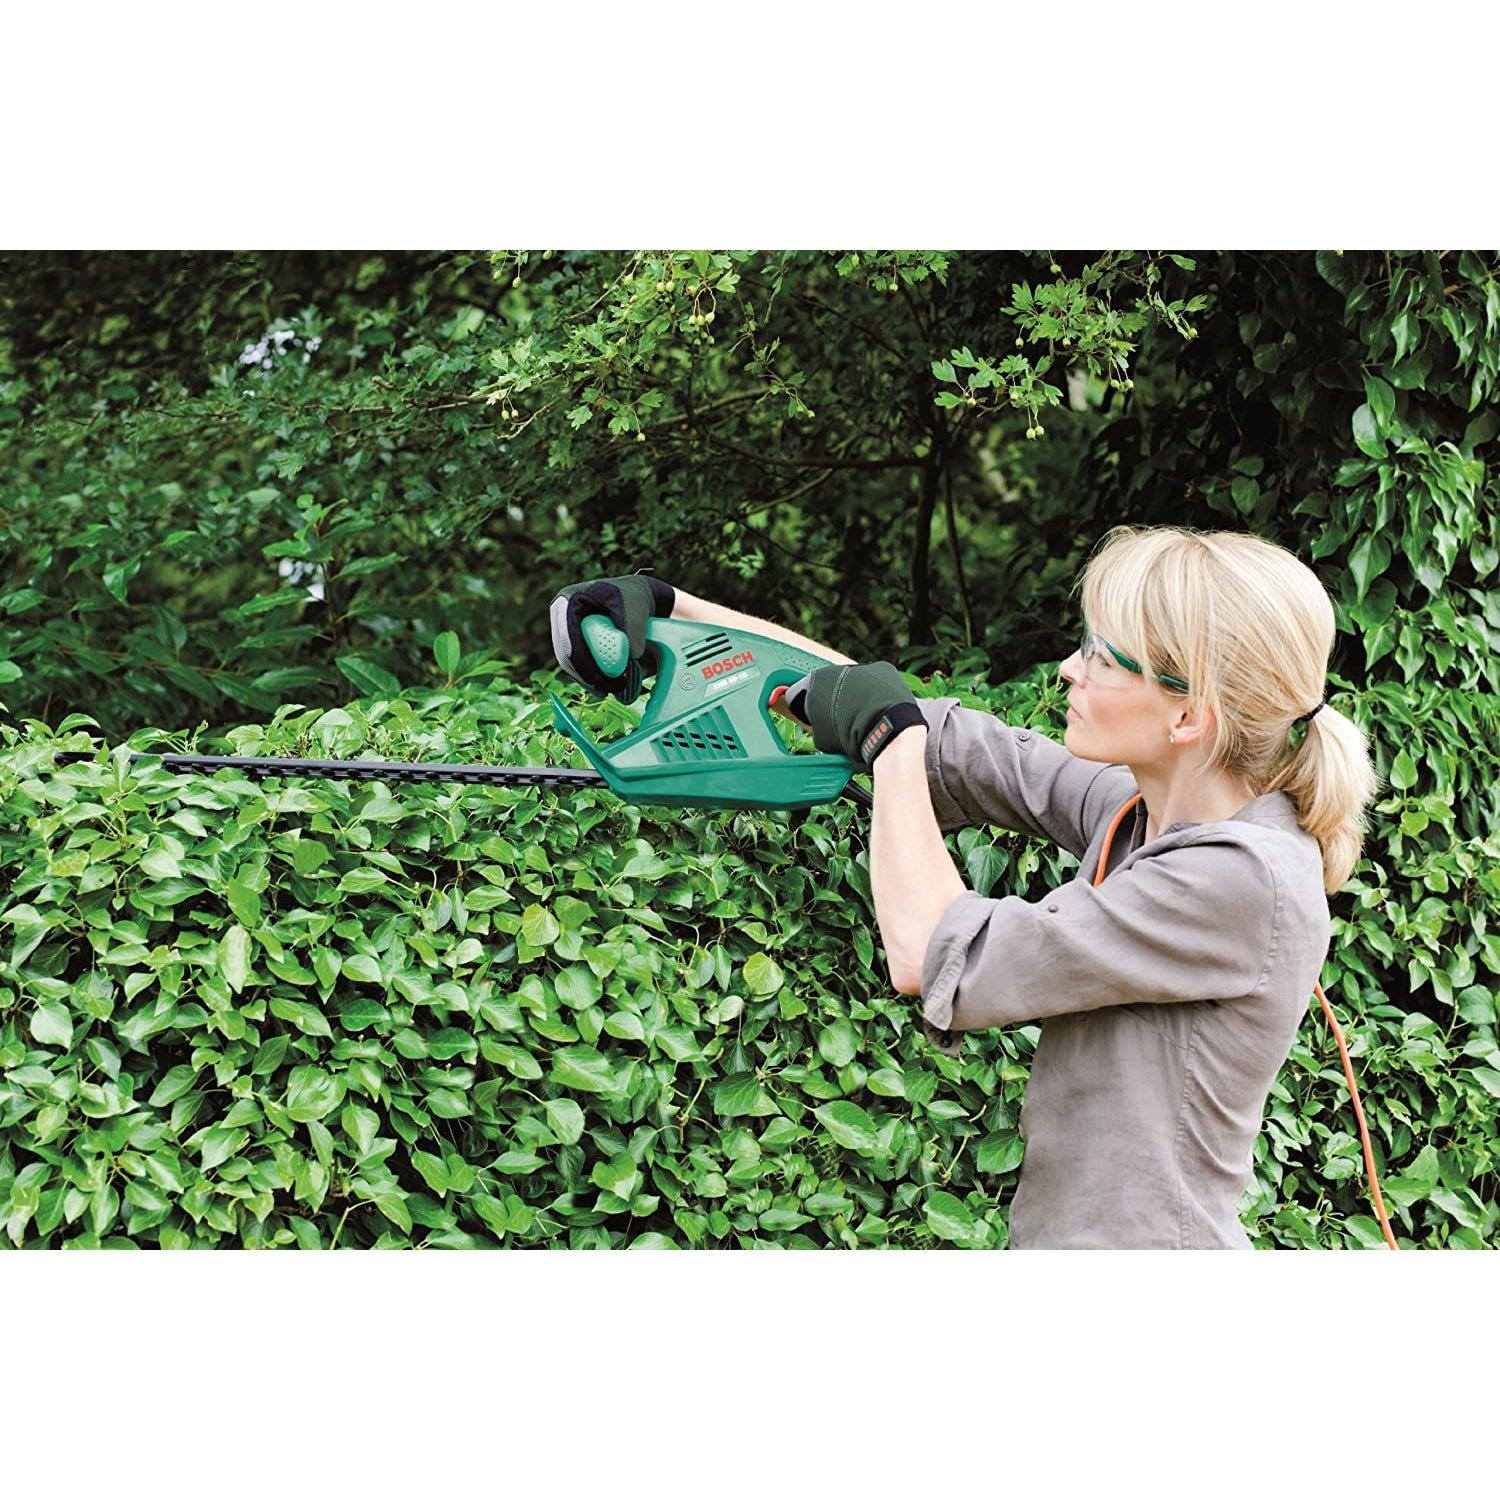 Bosch 0600847A70 AHS 45-16 Electric Hedge Cutter, 450 mm Blade Length, 16 mm Tooth Opening, Green